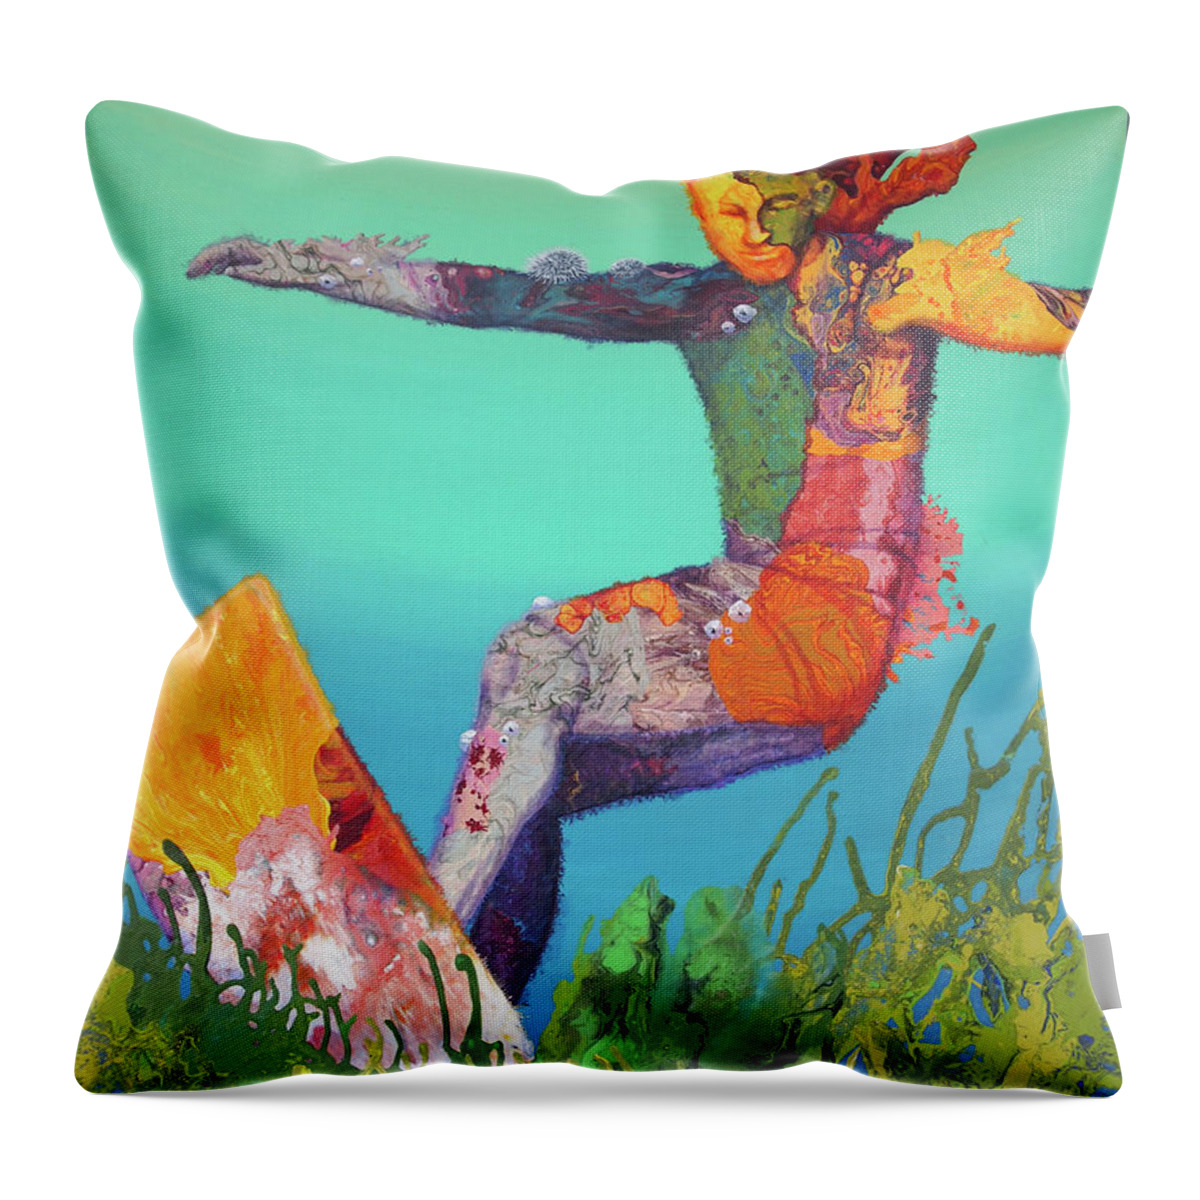 Surfer Throw Pillow featuring the painting Reef Rider by Marguerite Chadwick-Juner